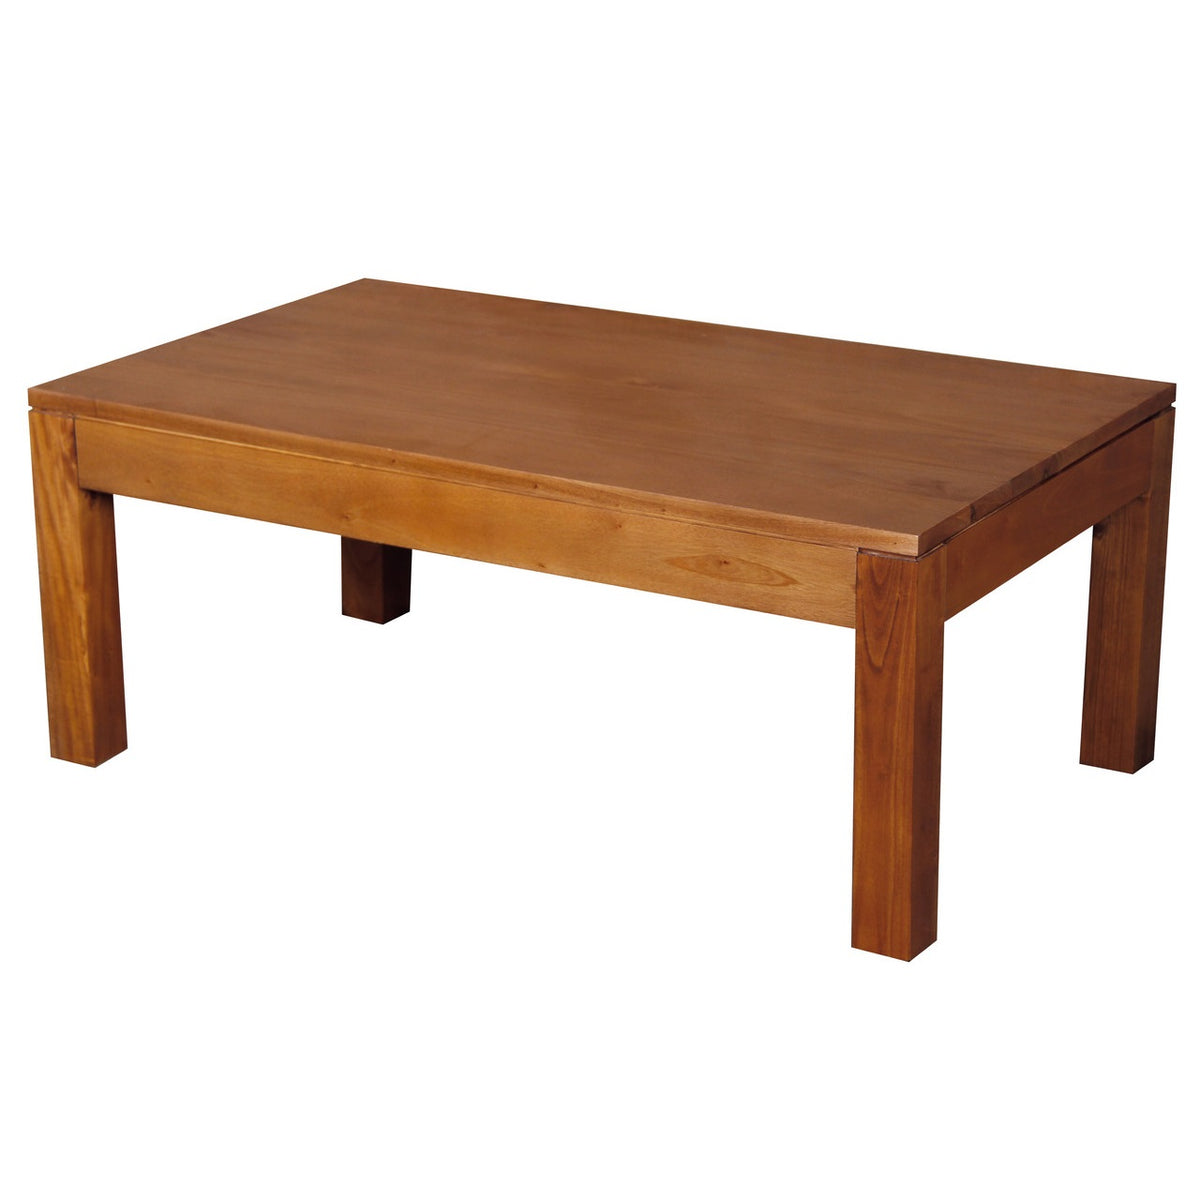 Amsterdam Solid Timber Coffee Table - Light Pecan